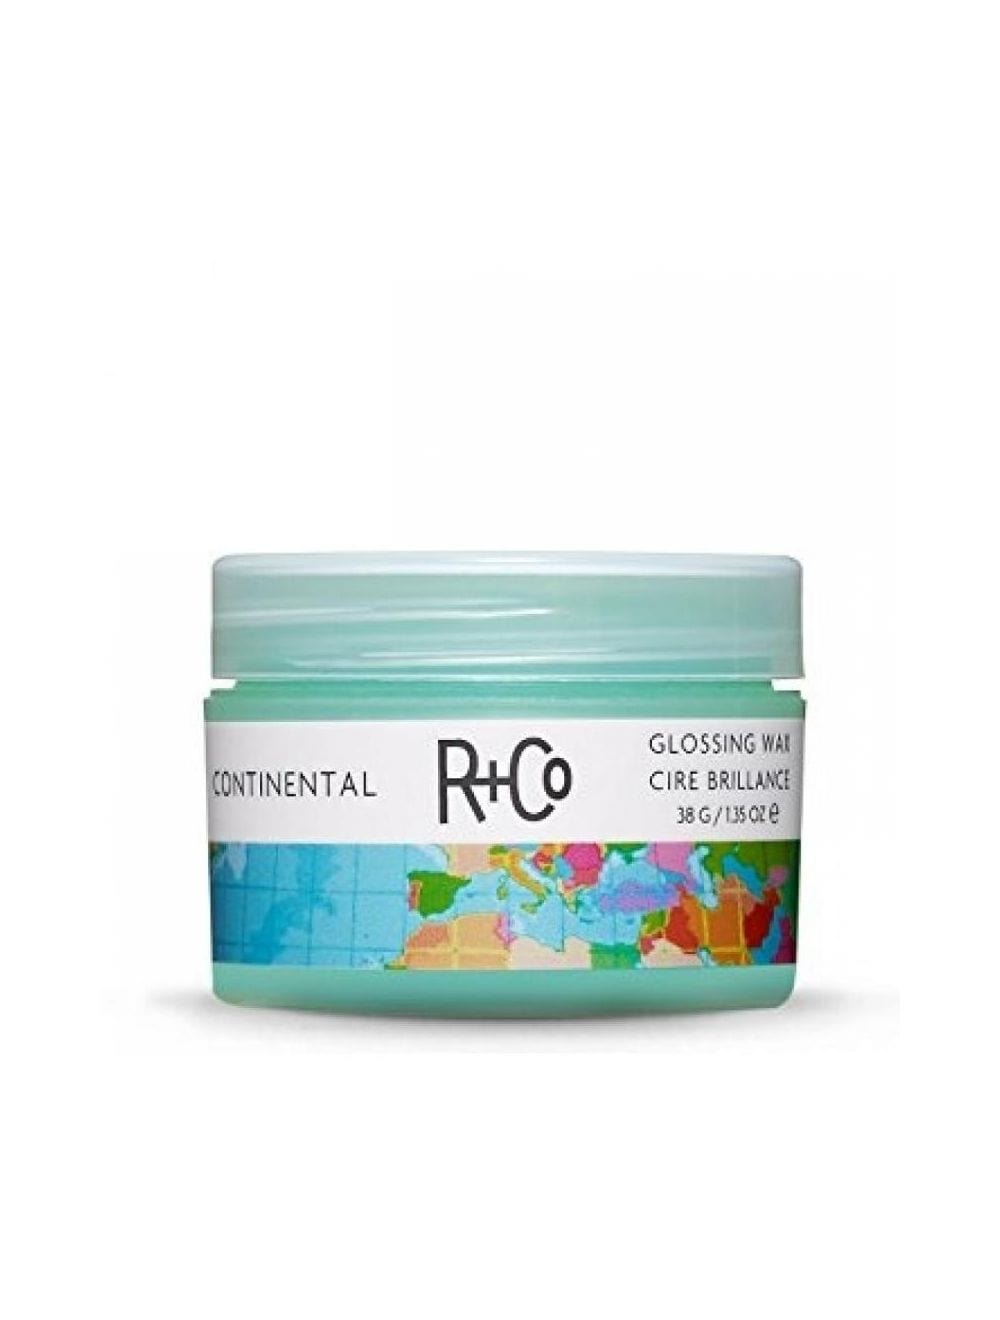 R+CO_CONTINENTAL Glossing Wax 2.2oz_Cosmetic World